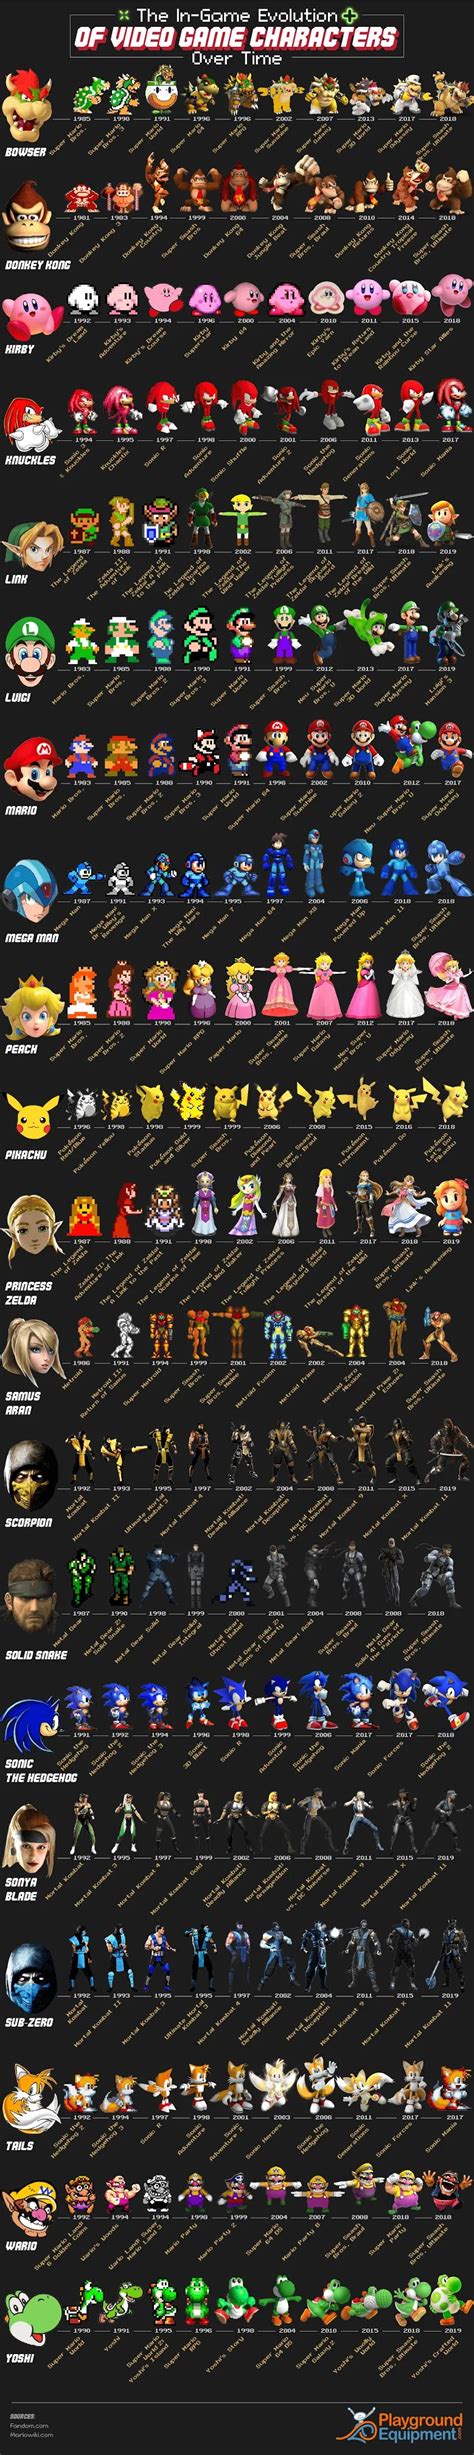 The In Game Evolution Of Video Game Characters Over Time Infographic